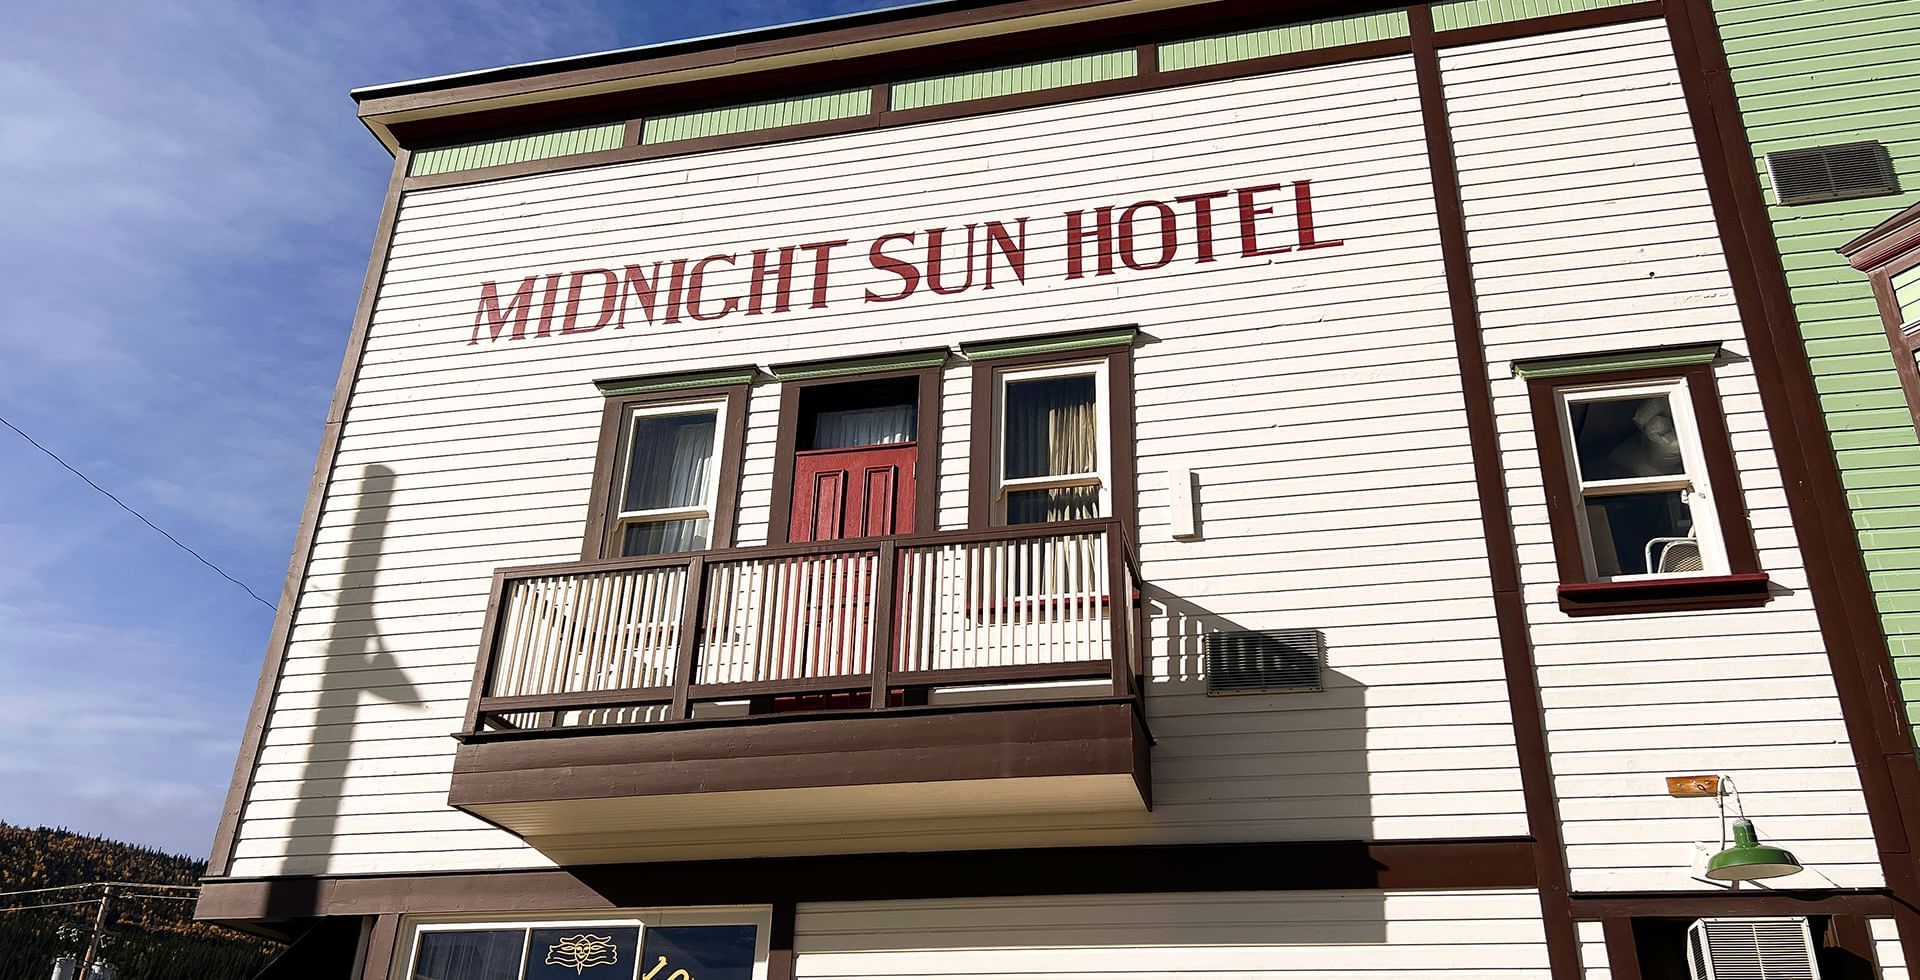 Low angle exterior view of Midnight Sun, a Coast Hotel